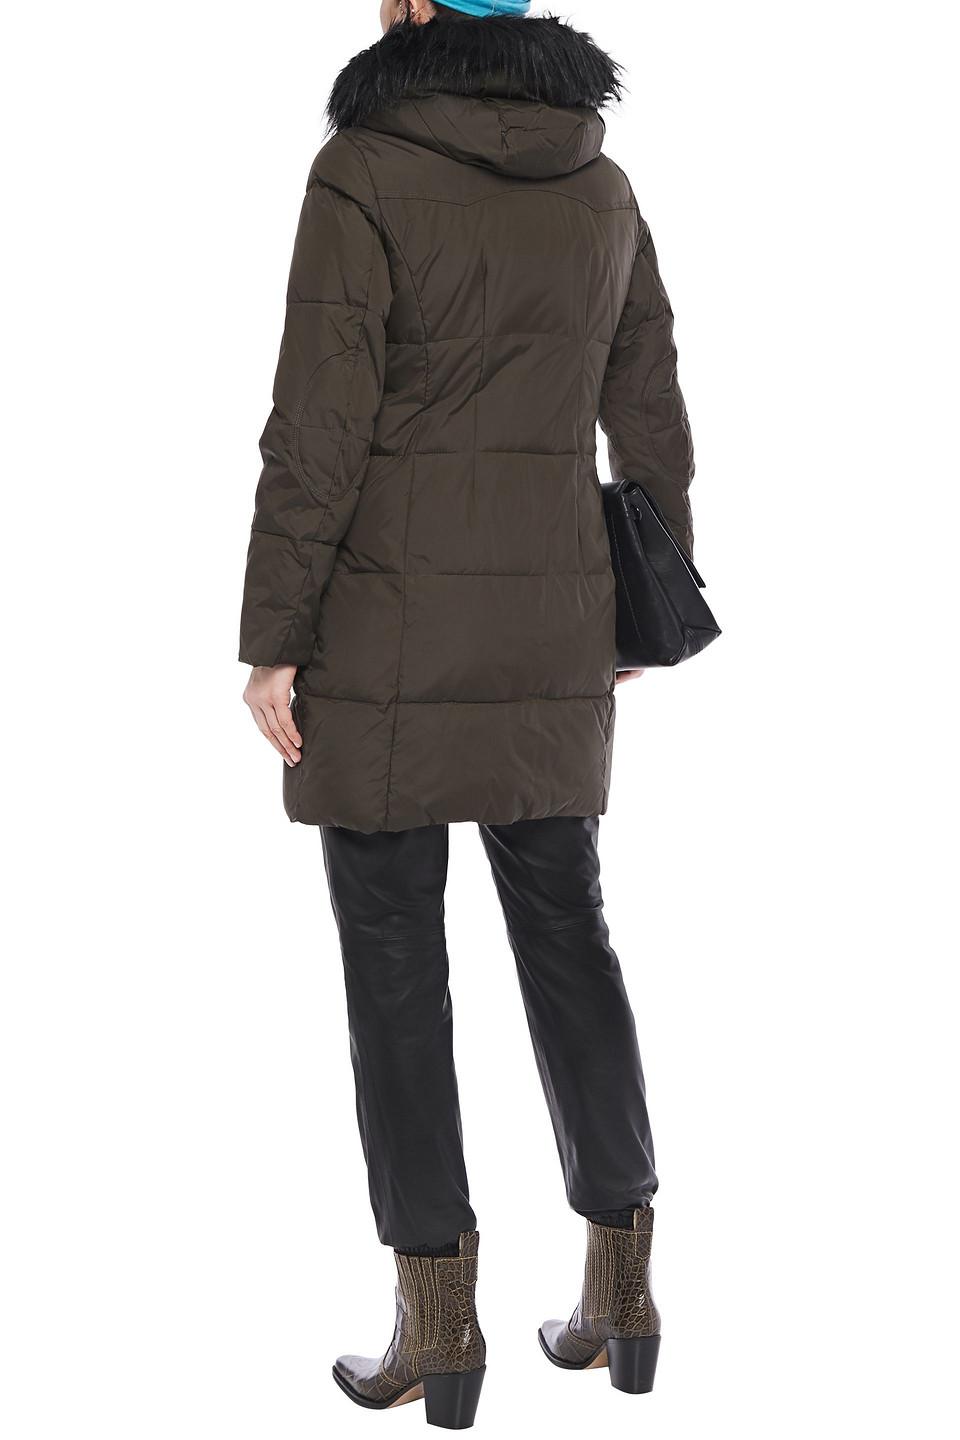 DKNY Quilted Shell Hooded Coat in Army Green (Green) - Lyst